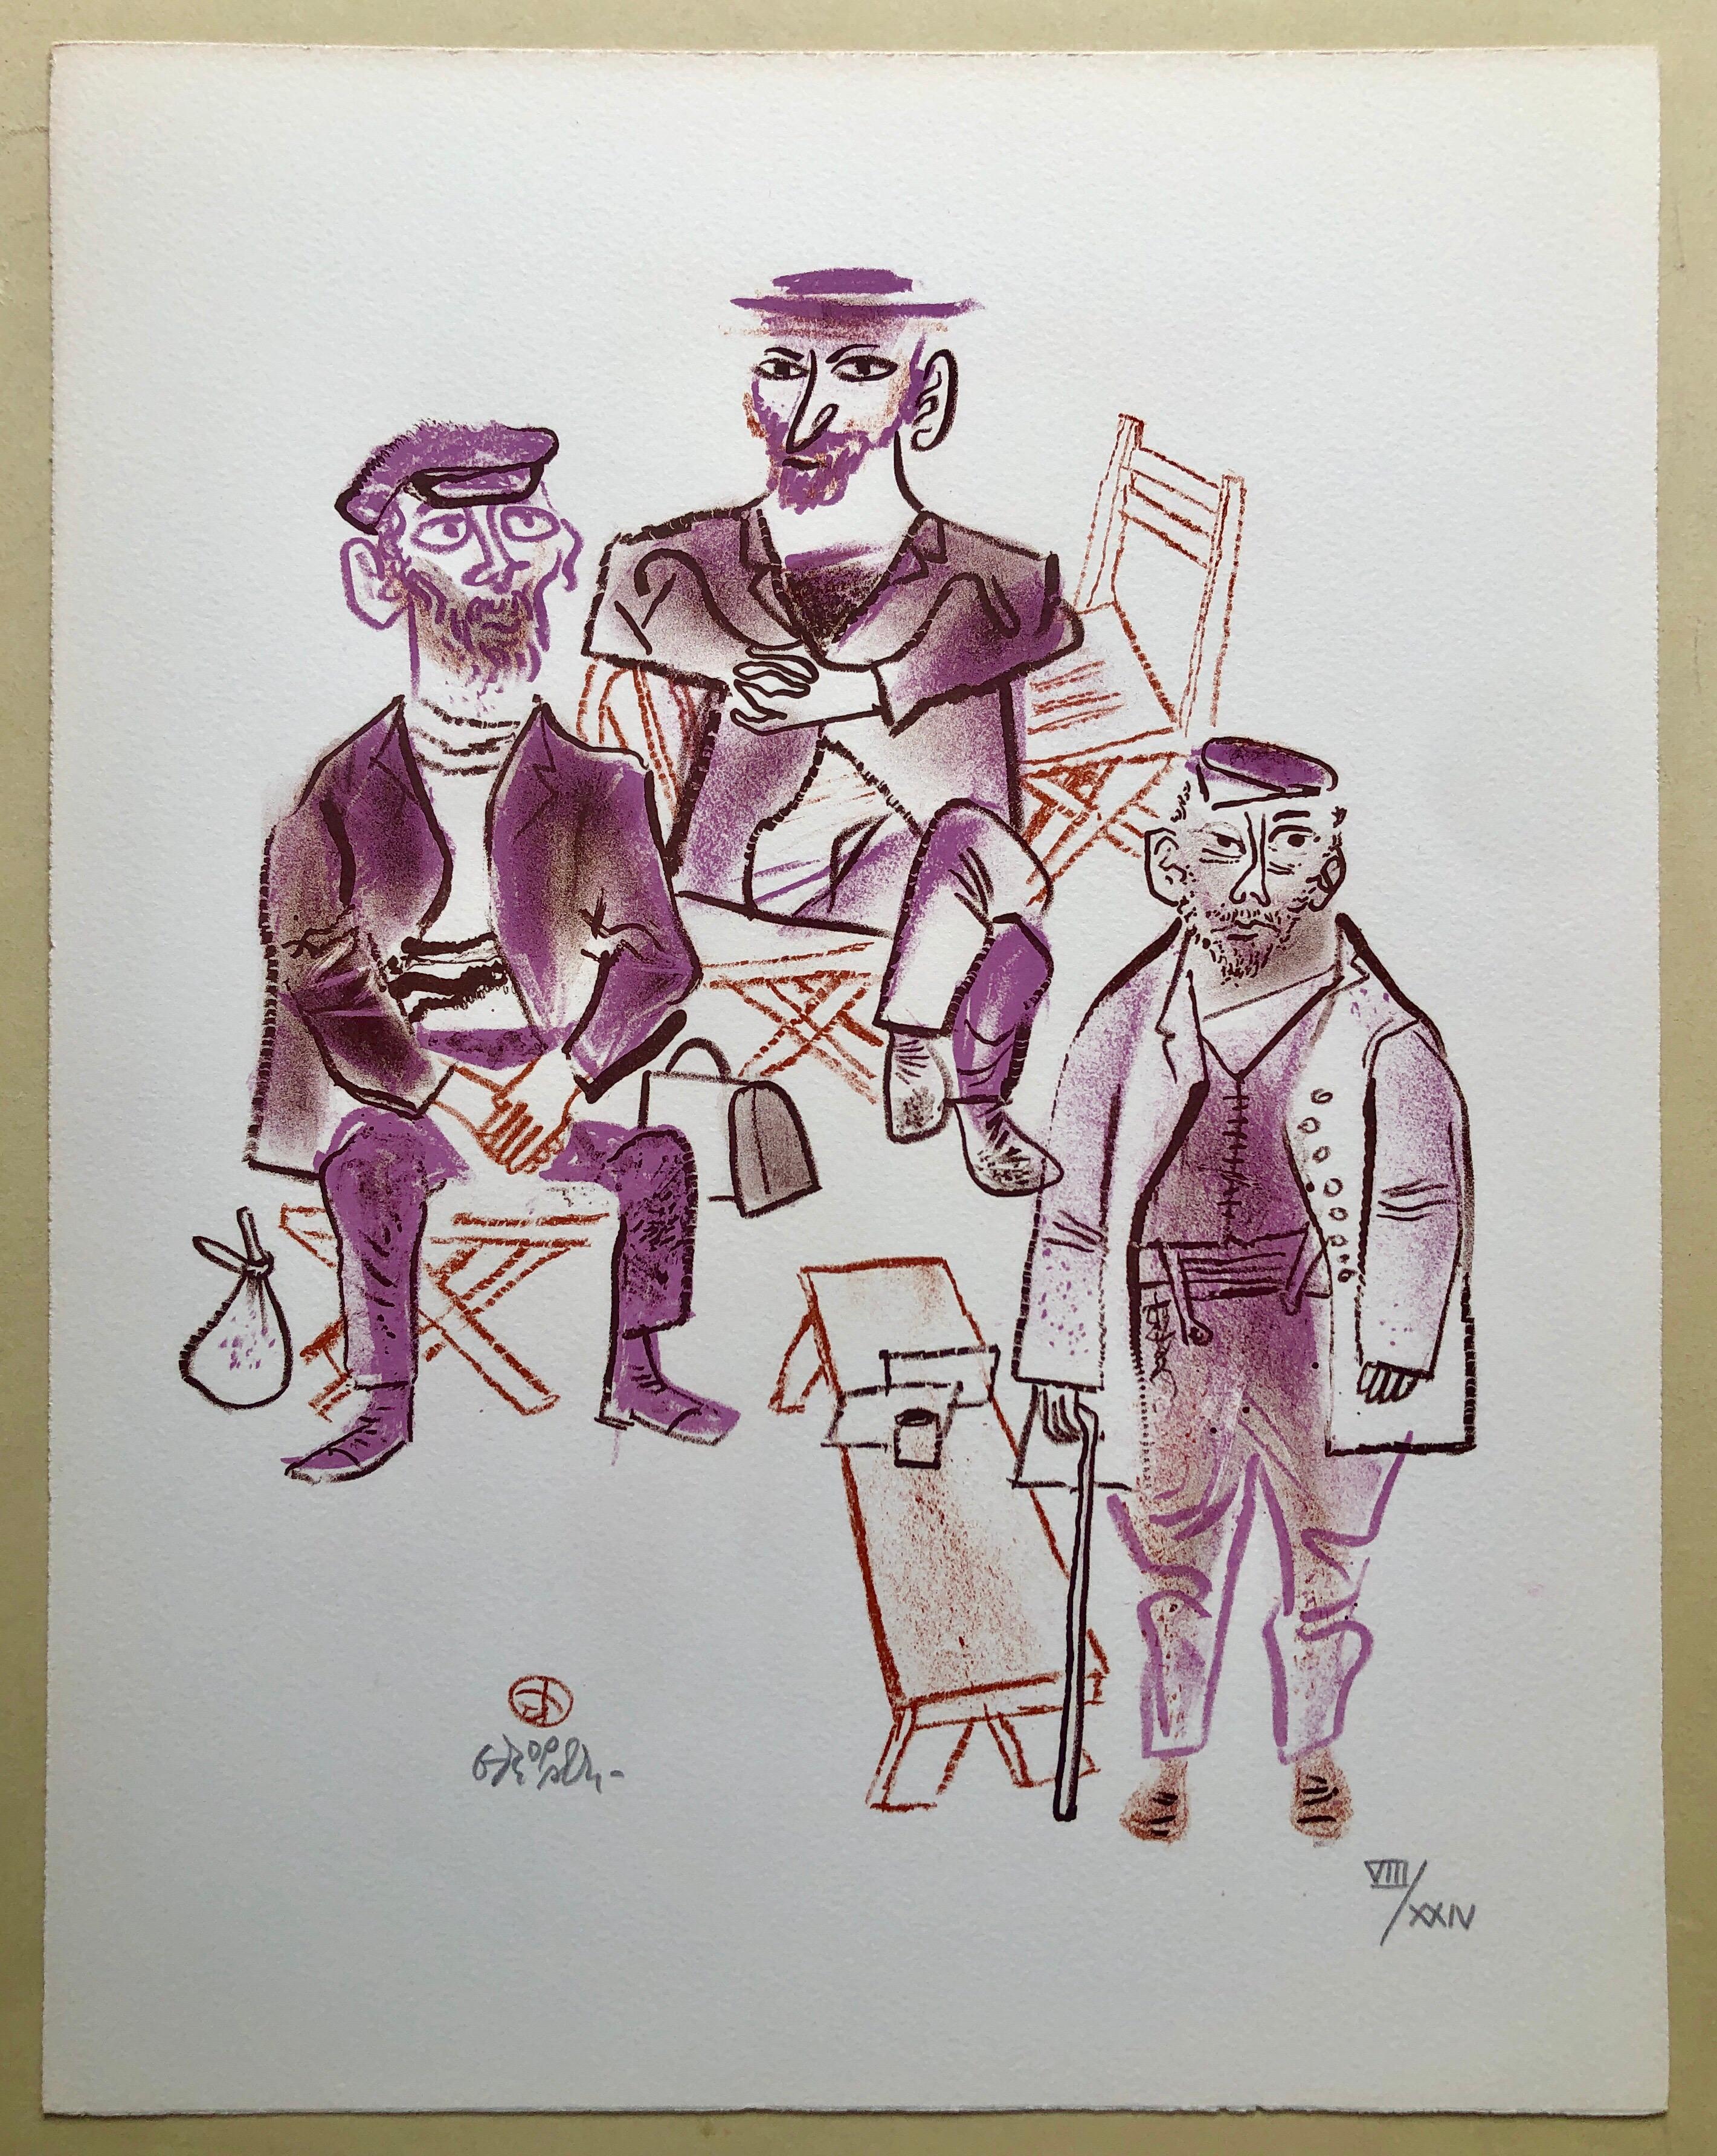 
Hand signed in pencil and numbered with Roman numerals 8/24. A very small edition.
Old Lower East Side of New York or East European Shtetl. Jewish Shtetl Peddler Merchant. humorous Yiddish art.
The New-York born artist William Gropper was a painter